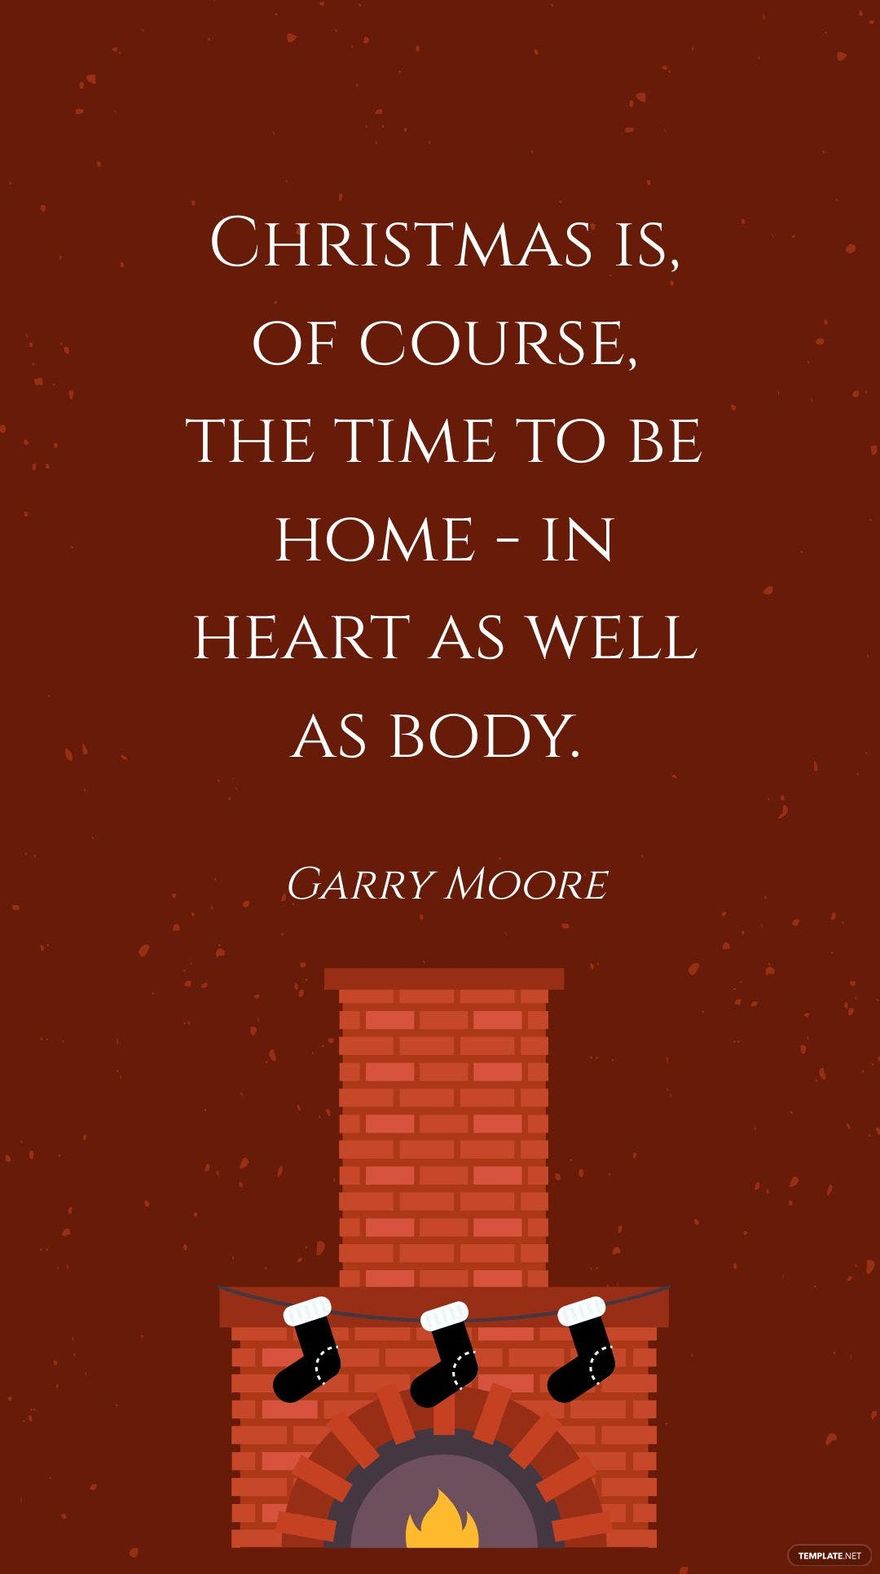 Free Garry Moore - Christmas is, of course, the time to be home - in heart as well as body.